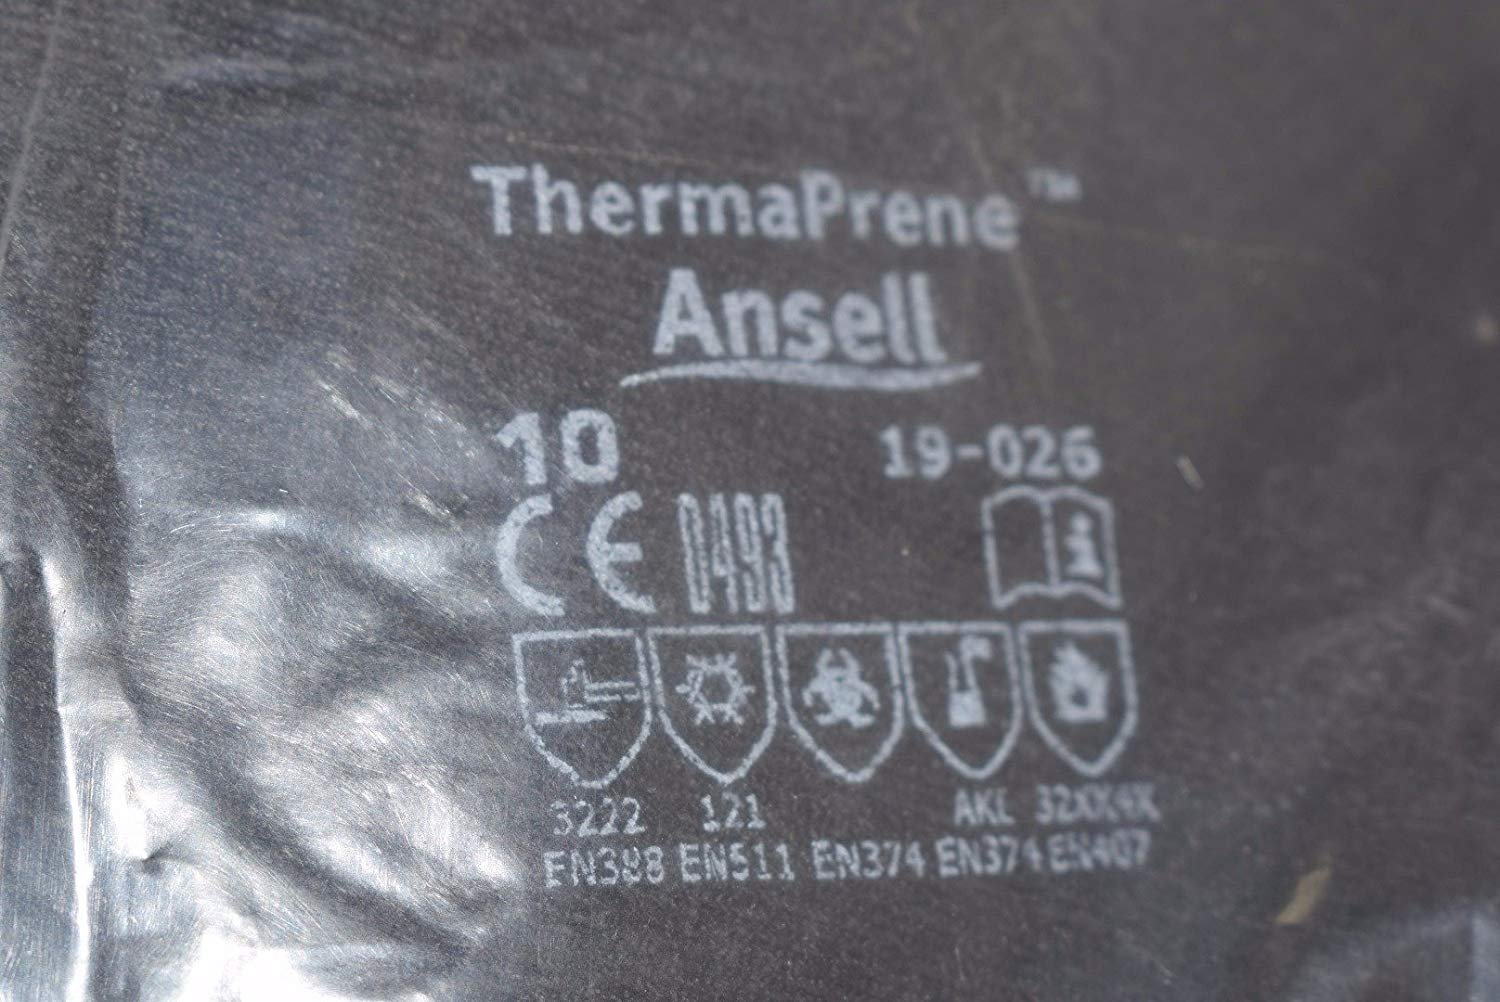 Ansell 19-026 214023 Heat-Resistant, Lined Neoprene Gloves, Size 10, 26"L - 1 Pair - image 2 of 2